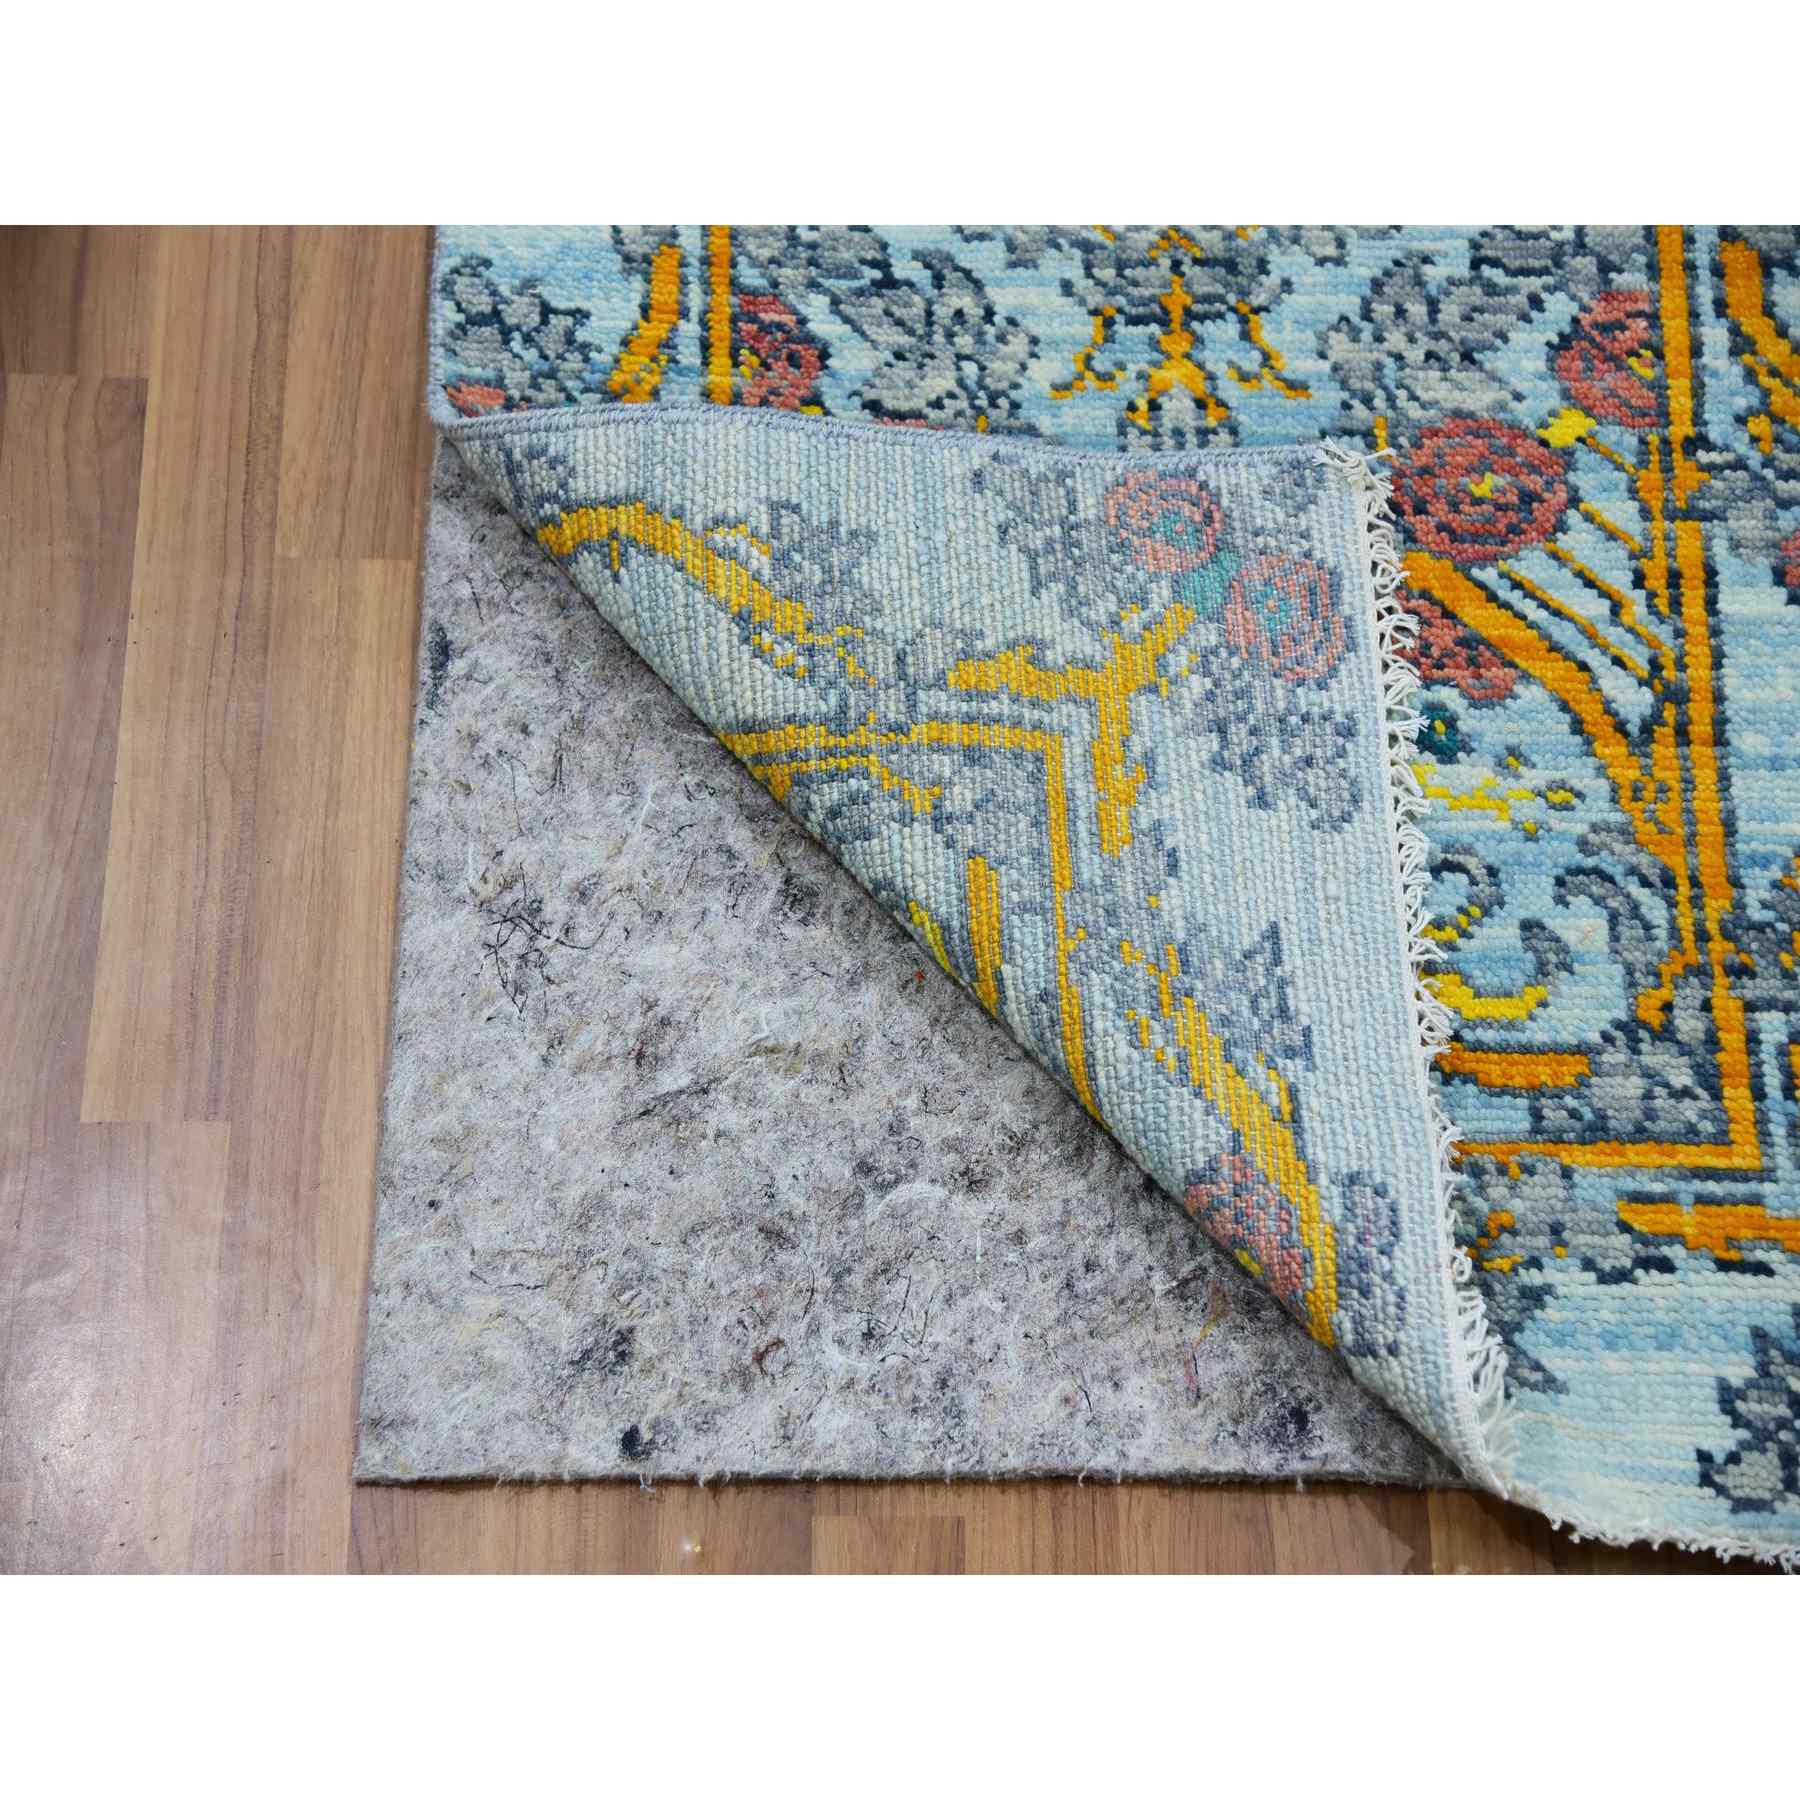 Modern-and-Contemporary-Hand-Knotted-Rug-399840